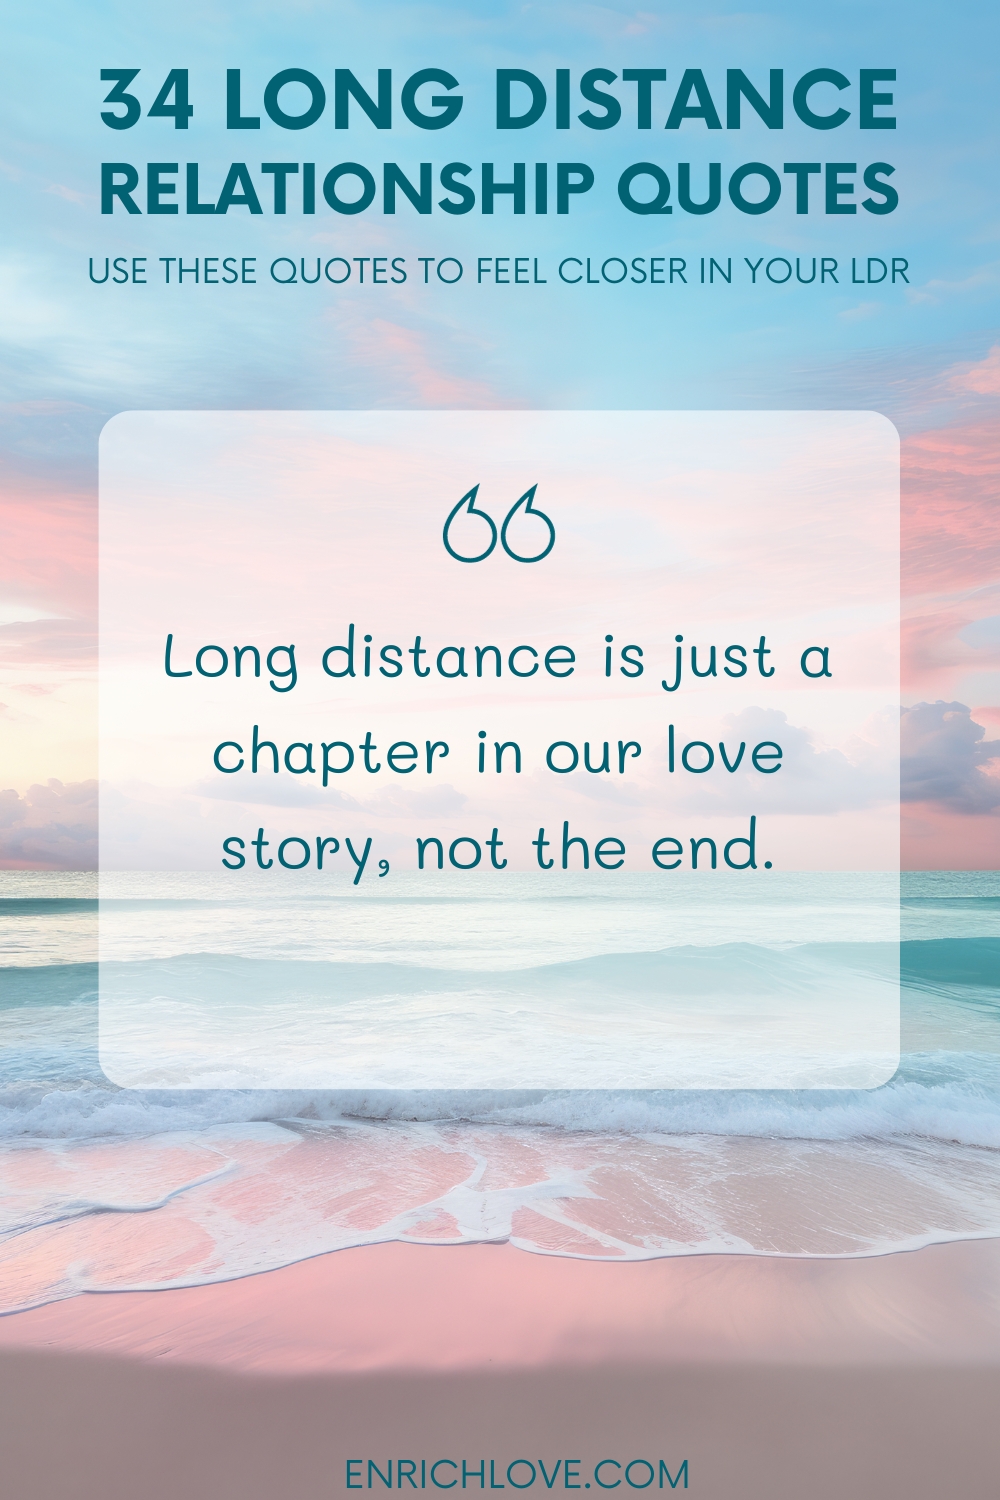 34 Long Distance Relationship Quotes - Long distance is just a chapter in our love story, not the end.